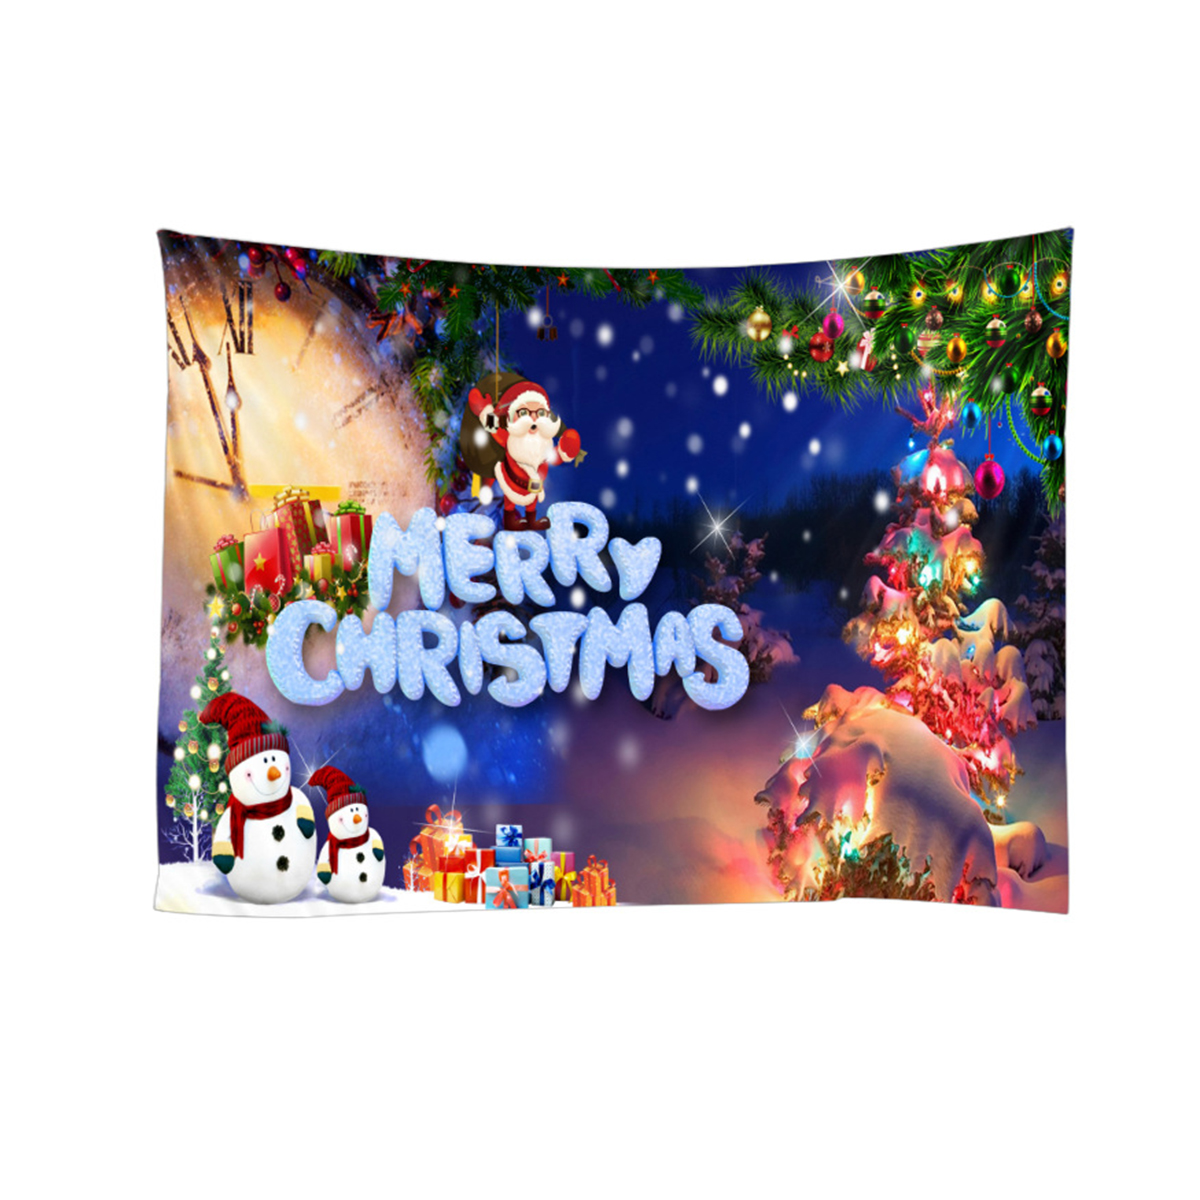 Christmas-Santa-Claus-Tapestry-Wall-Hanging-Winter-Bedspread-Throw-Blanket-Photography-Backdrop-Back-1912686-7